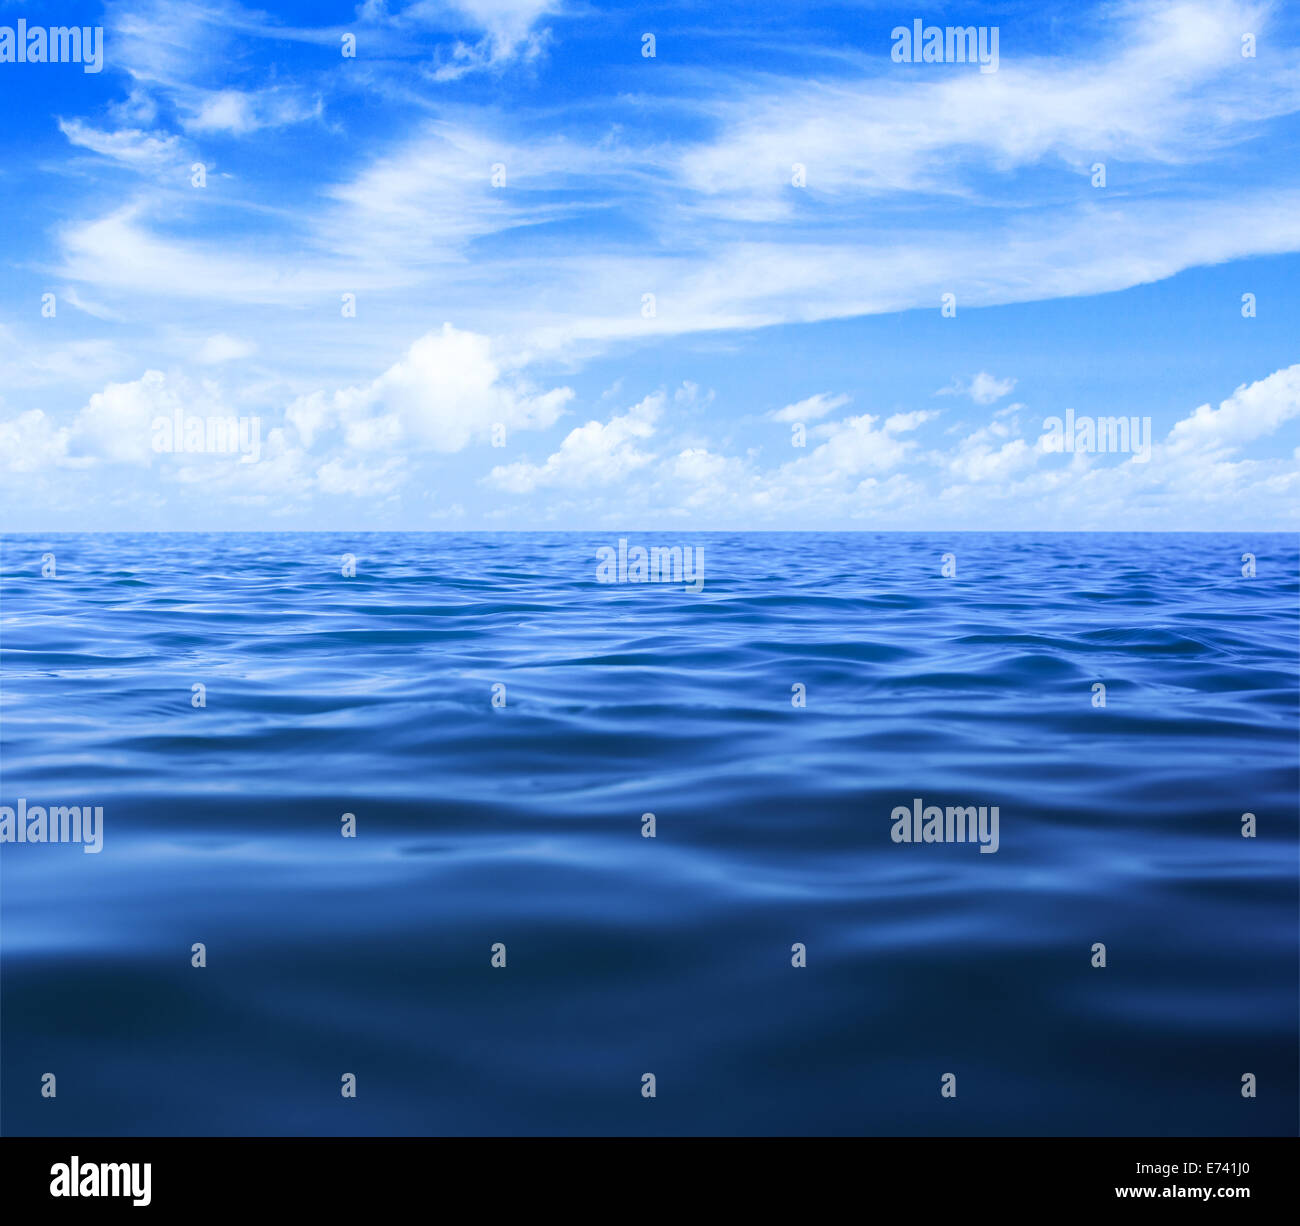 sea or ocean water surface with blue sky and clouds Stock Photo